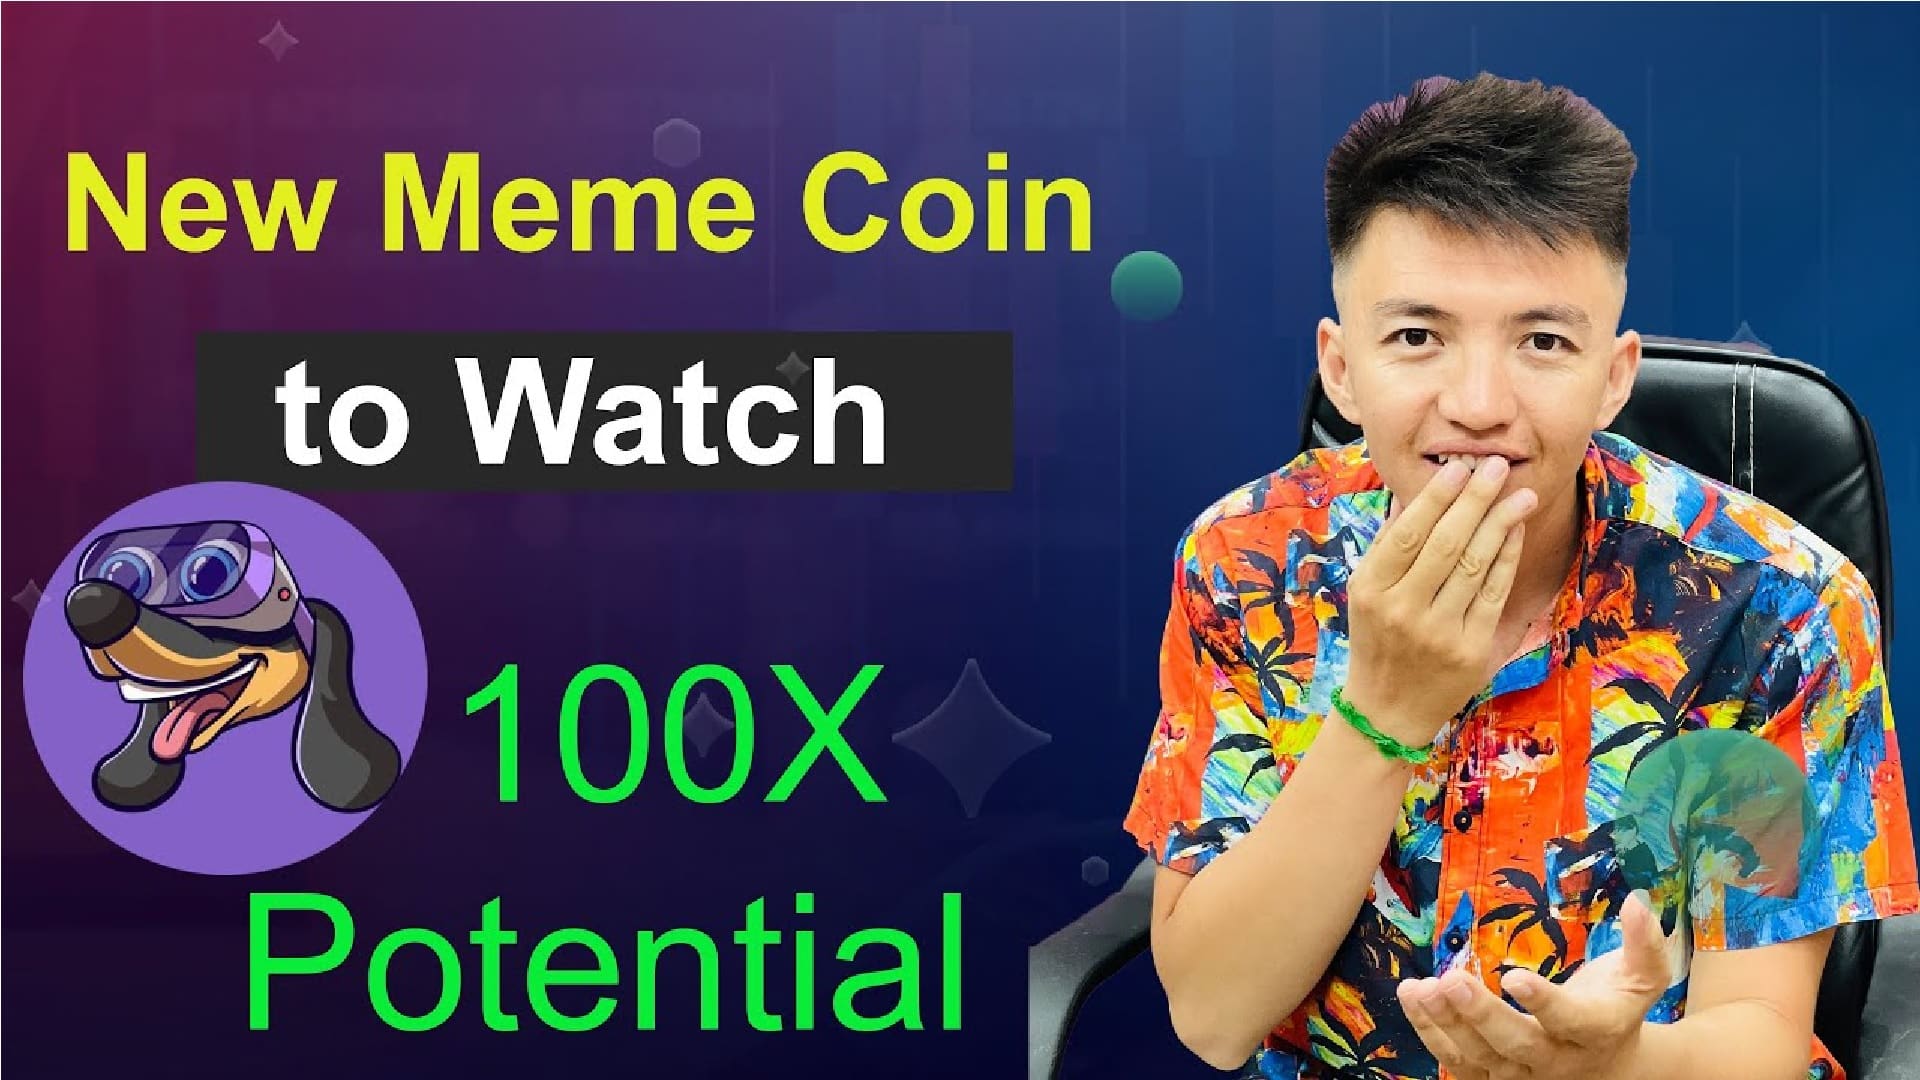 Crypto Boy Reviews a New Meme Coin to Watch with 100x Potential – Best Presale to Invest in?